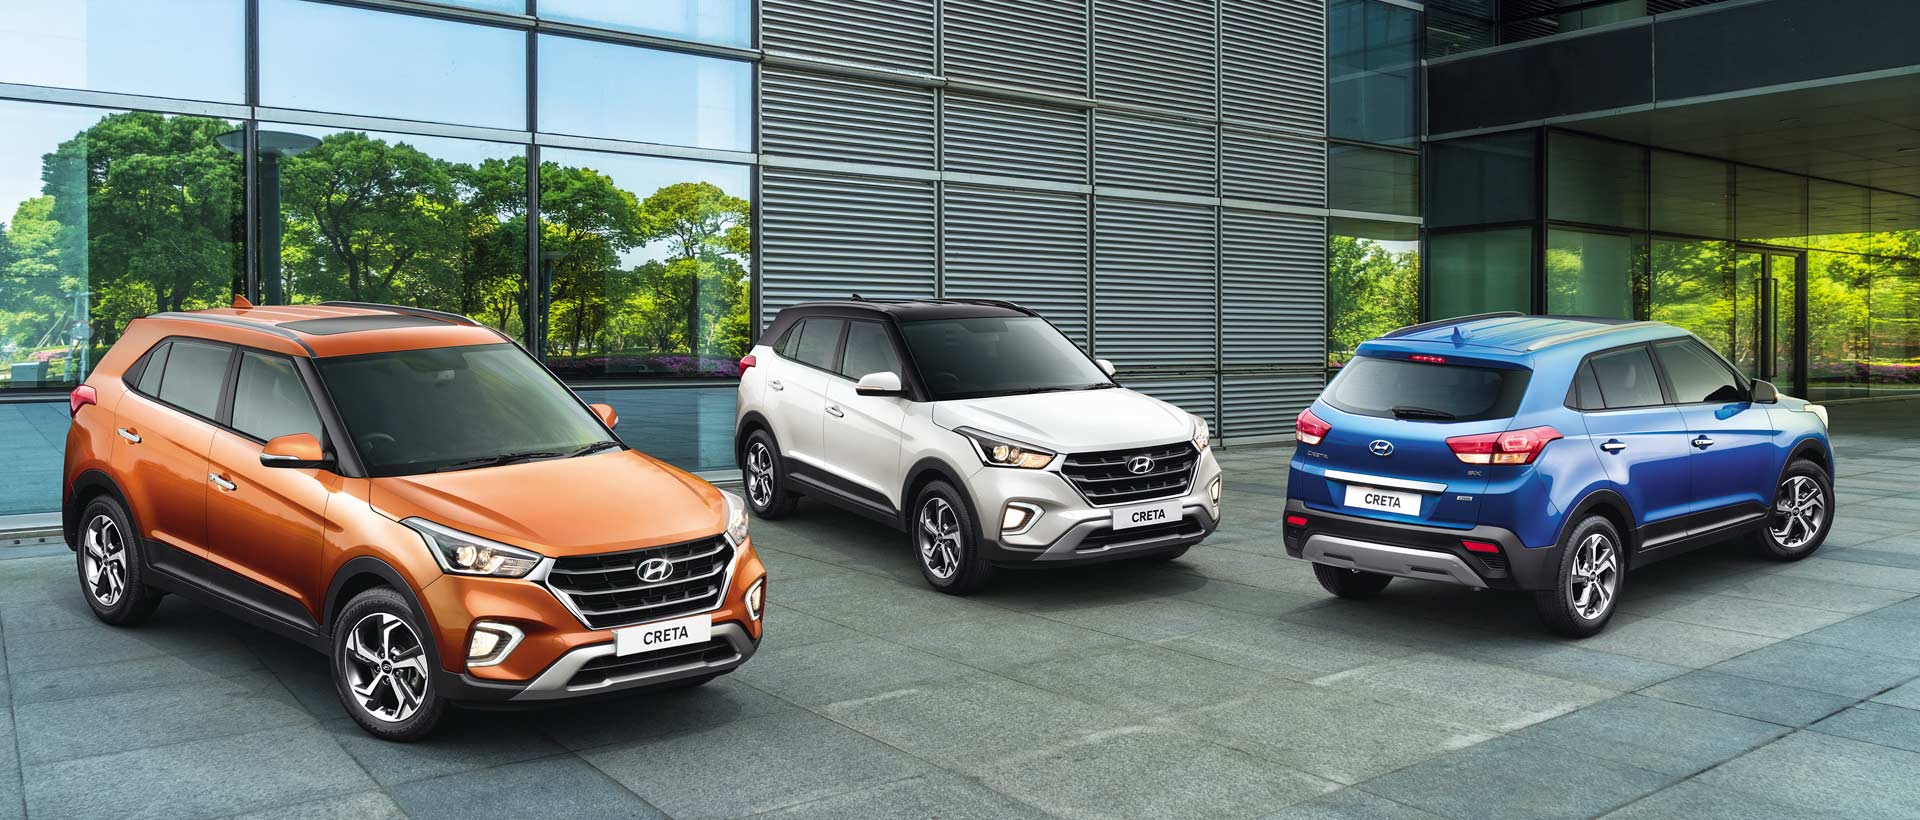 Hyundai creta 19. Hyundai Creta 2018. Hyundai ix25 и Hyundai Cantus. Hyundai Creta 4wd то. Hyundai ix25 Creta 20 frame Console.